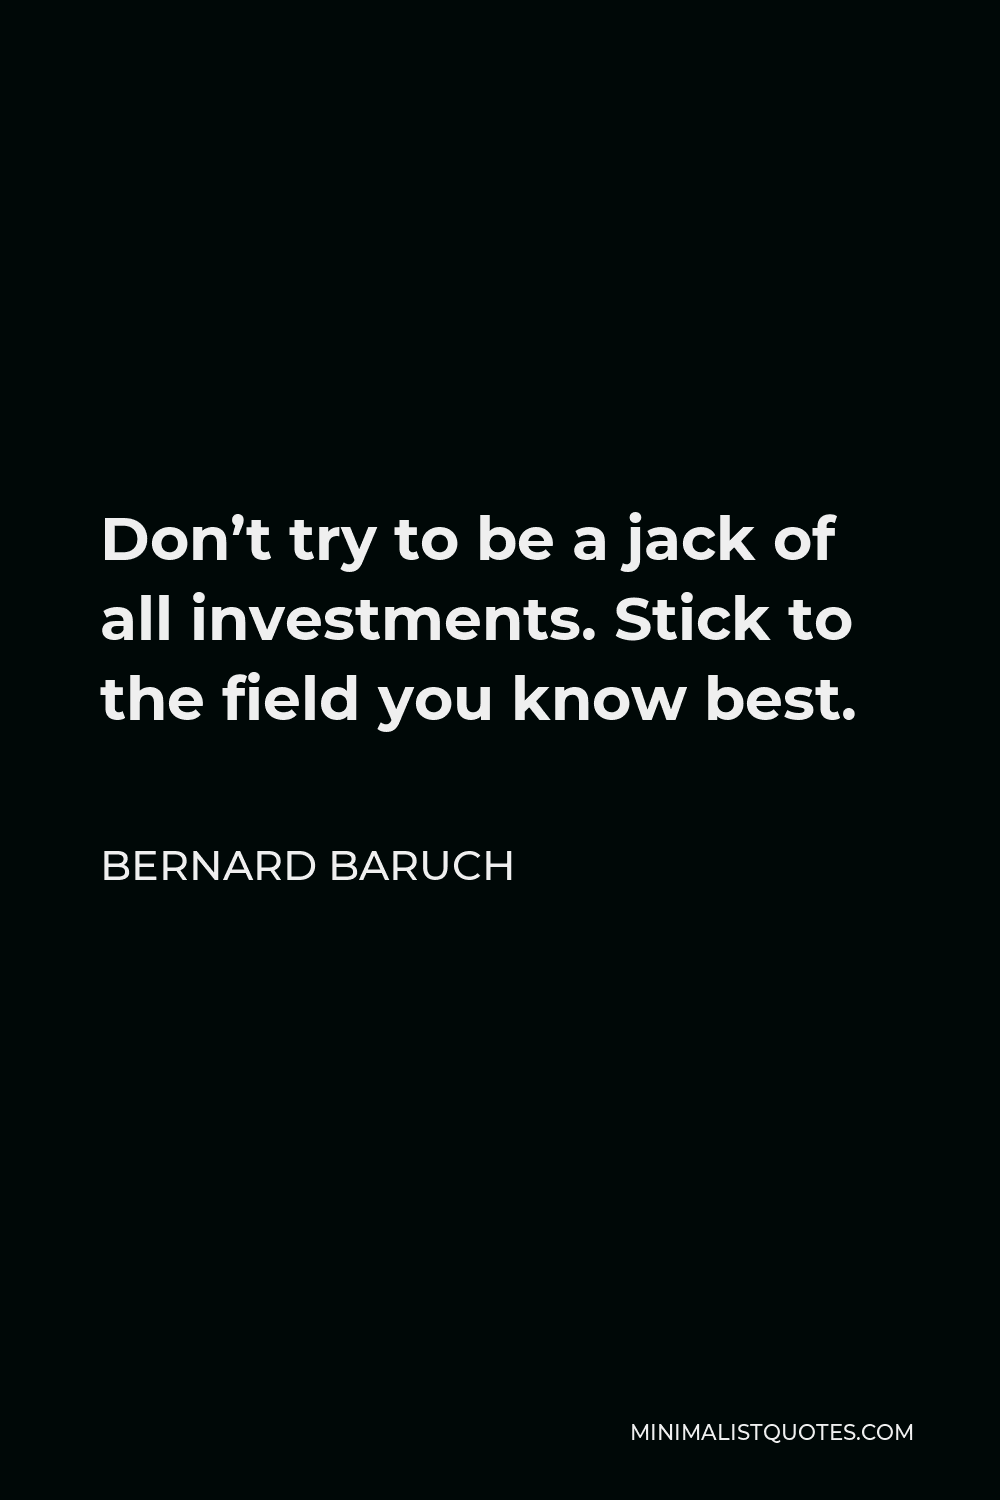 Bernard Baruch Quote - Don’t try to be a jack of all investments. Stick to the field you know best.